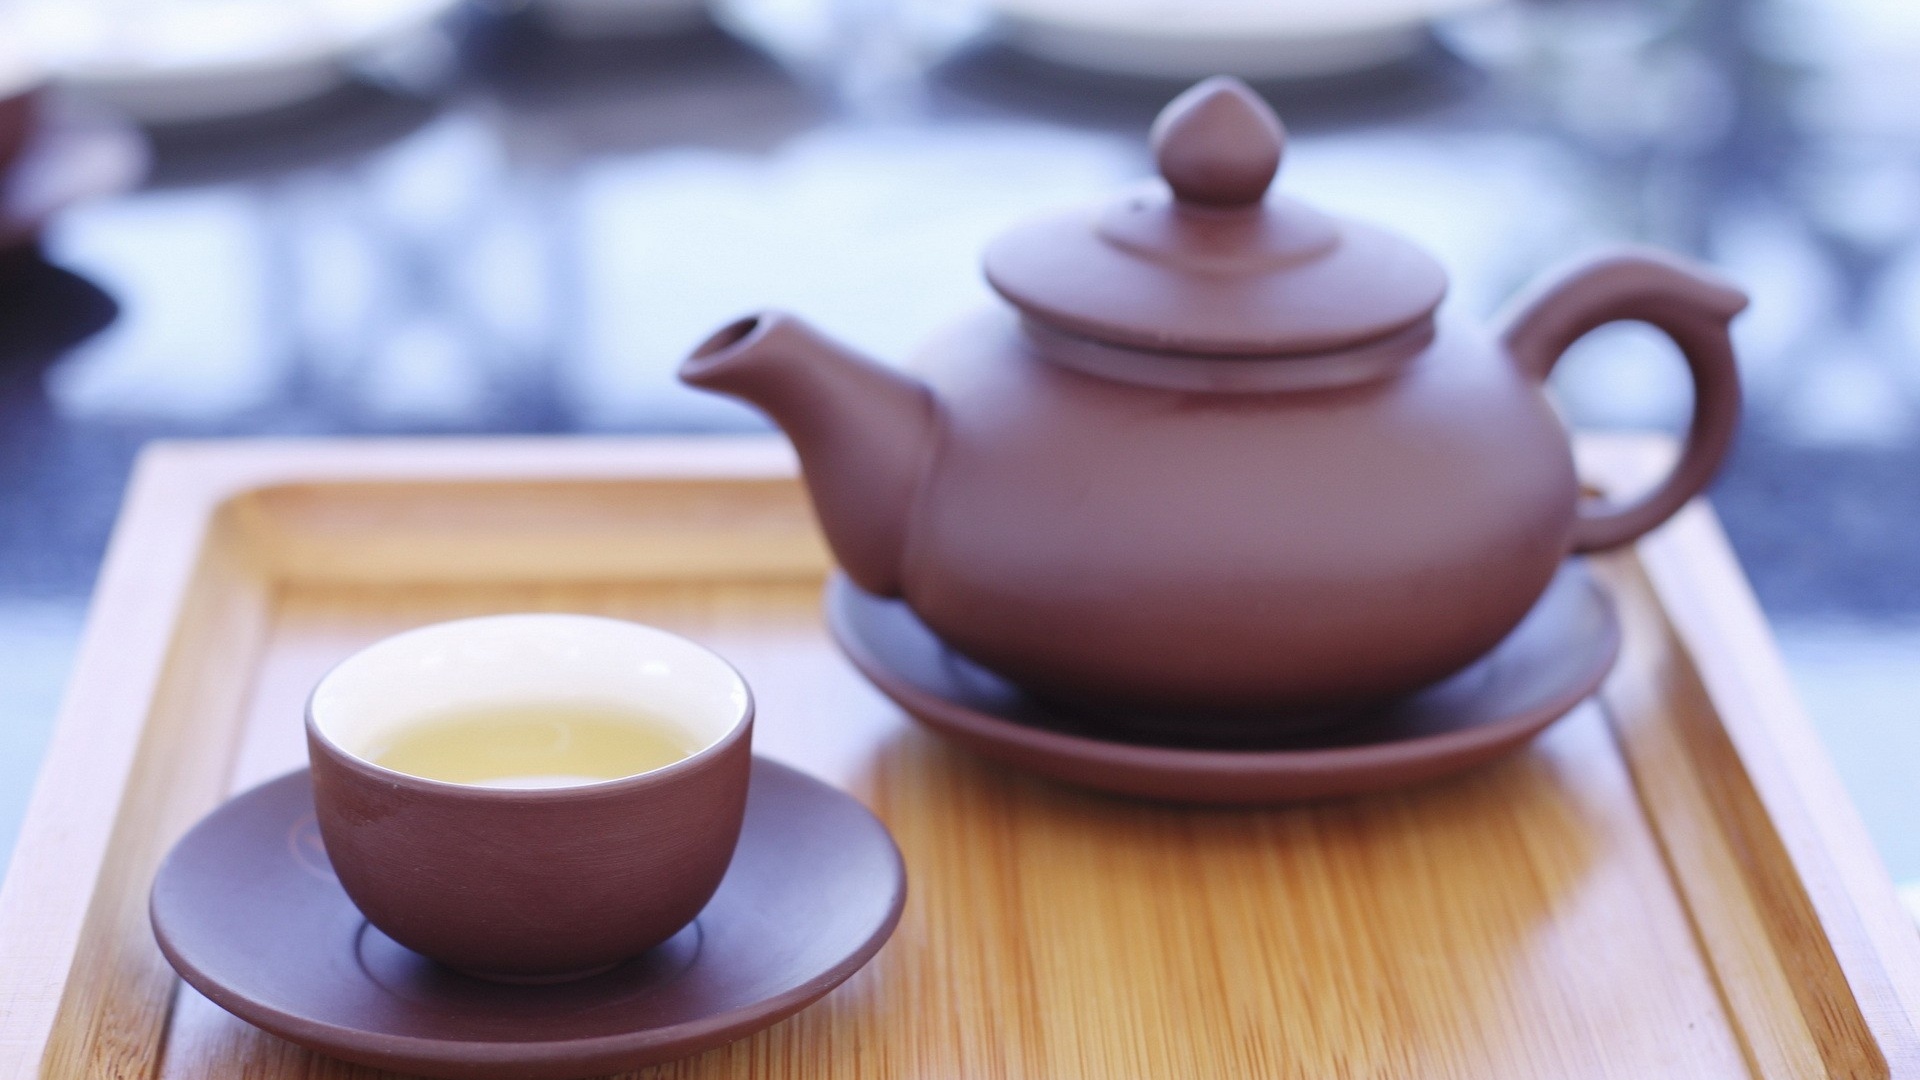 Wallpaper Teapot Cup Dishes Drink